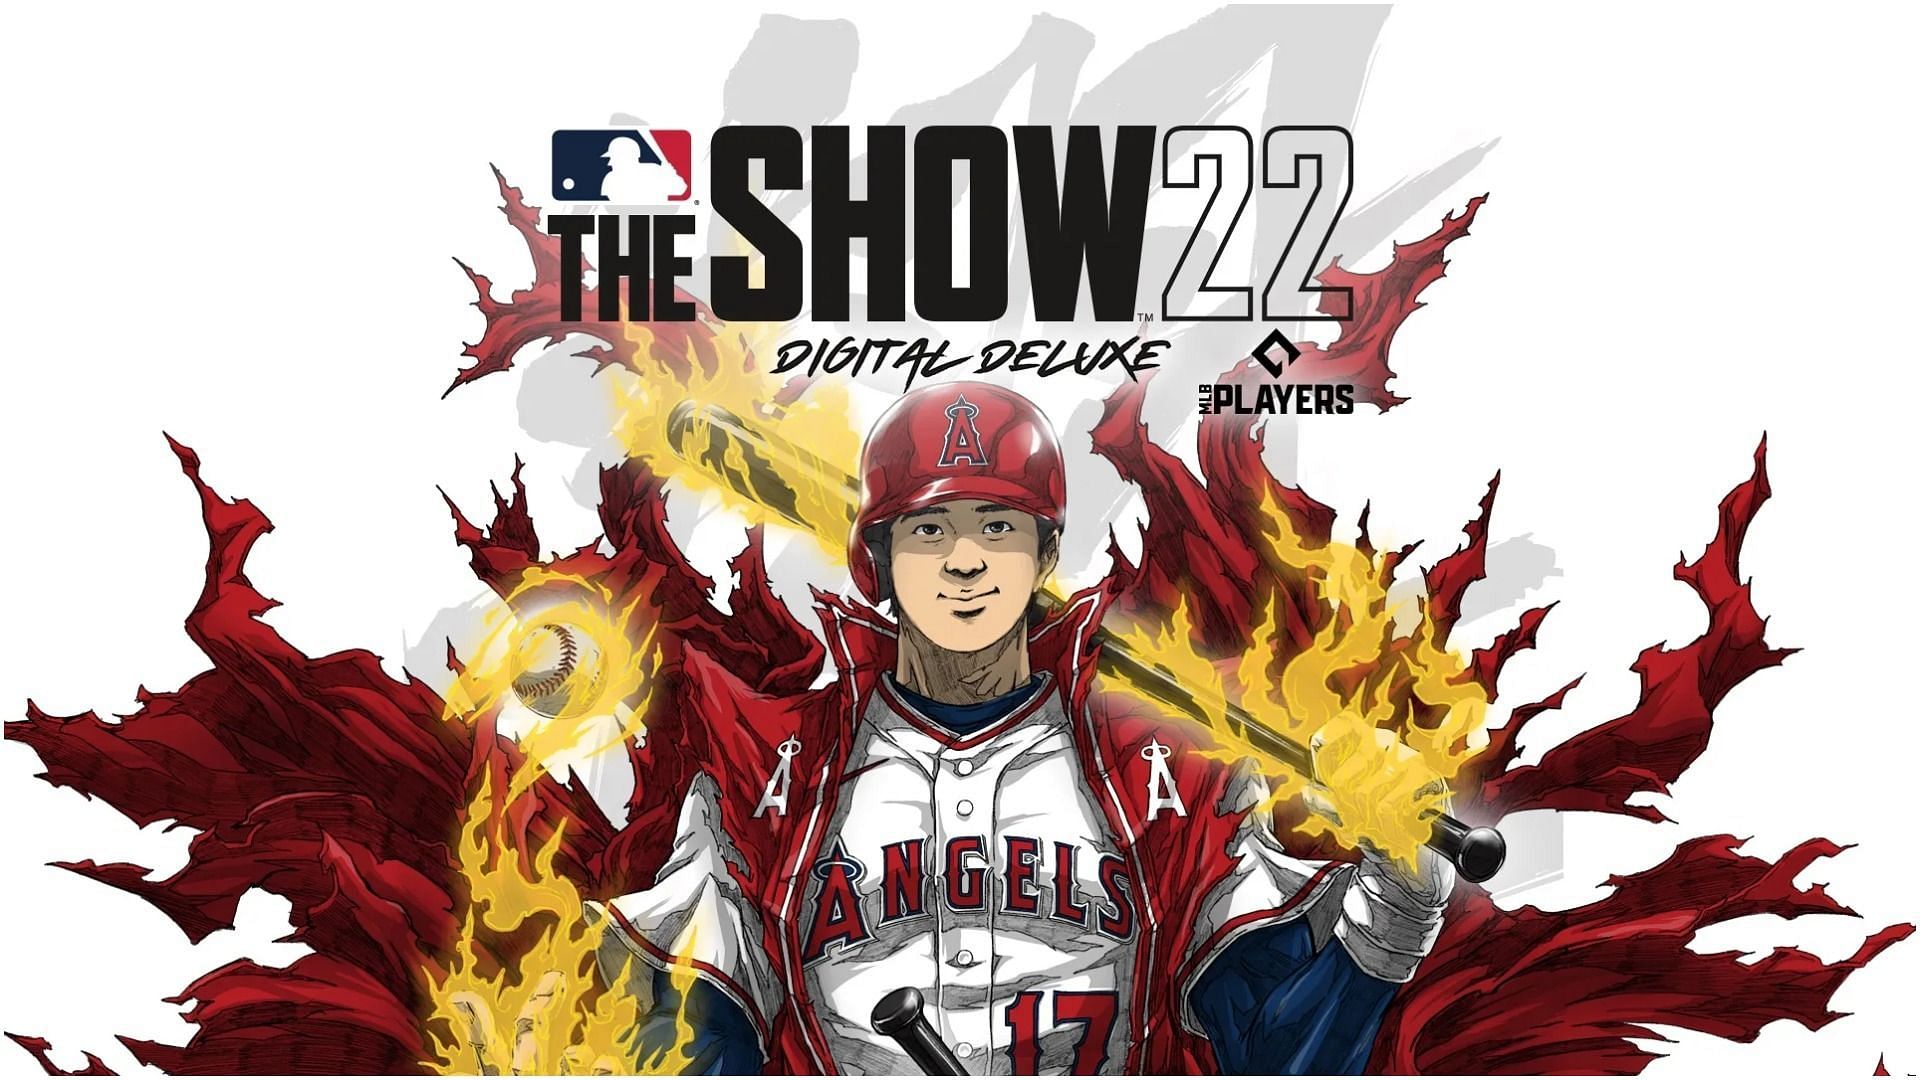 MLB The Show 22 Digital Deluxe Edition gives extra content at a higher price (Image via Sony)